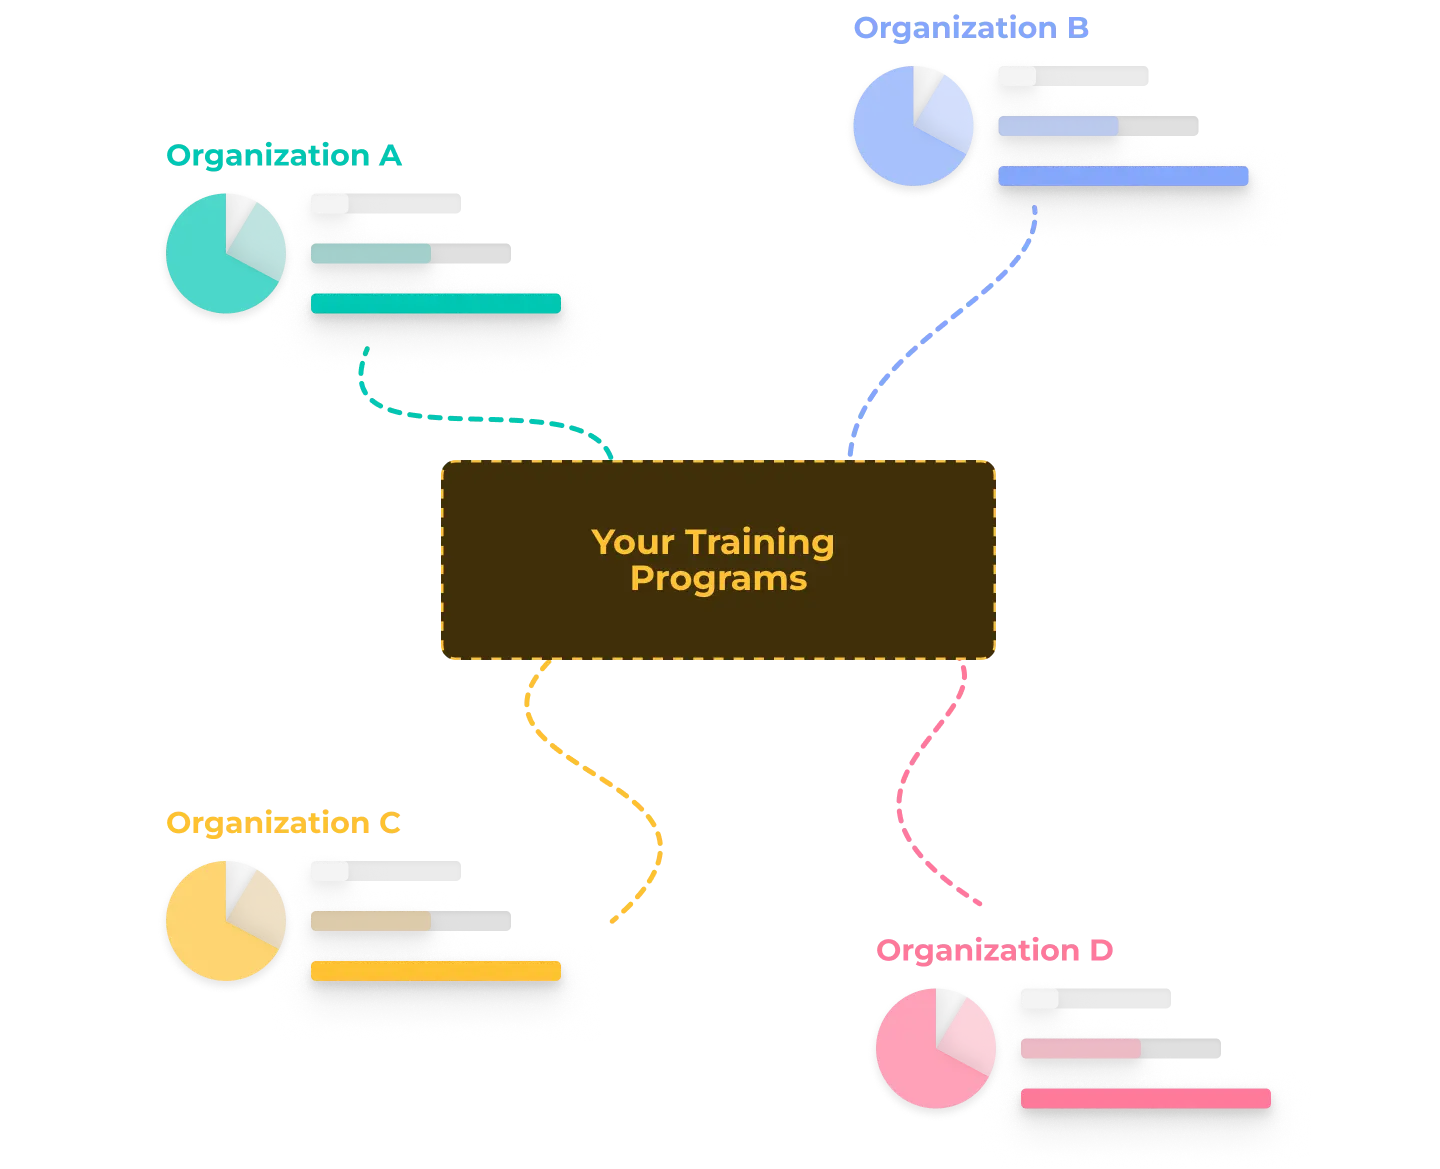 Organizations manage their own training graphic